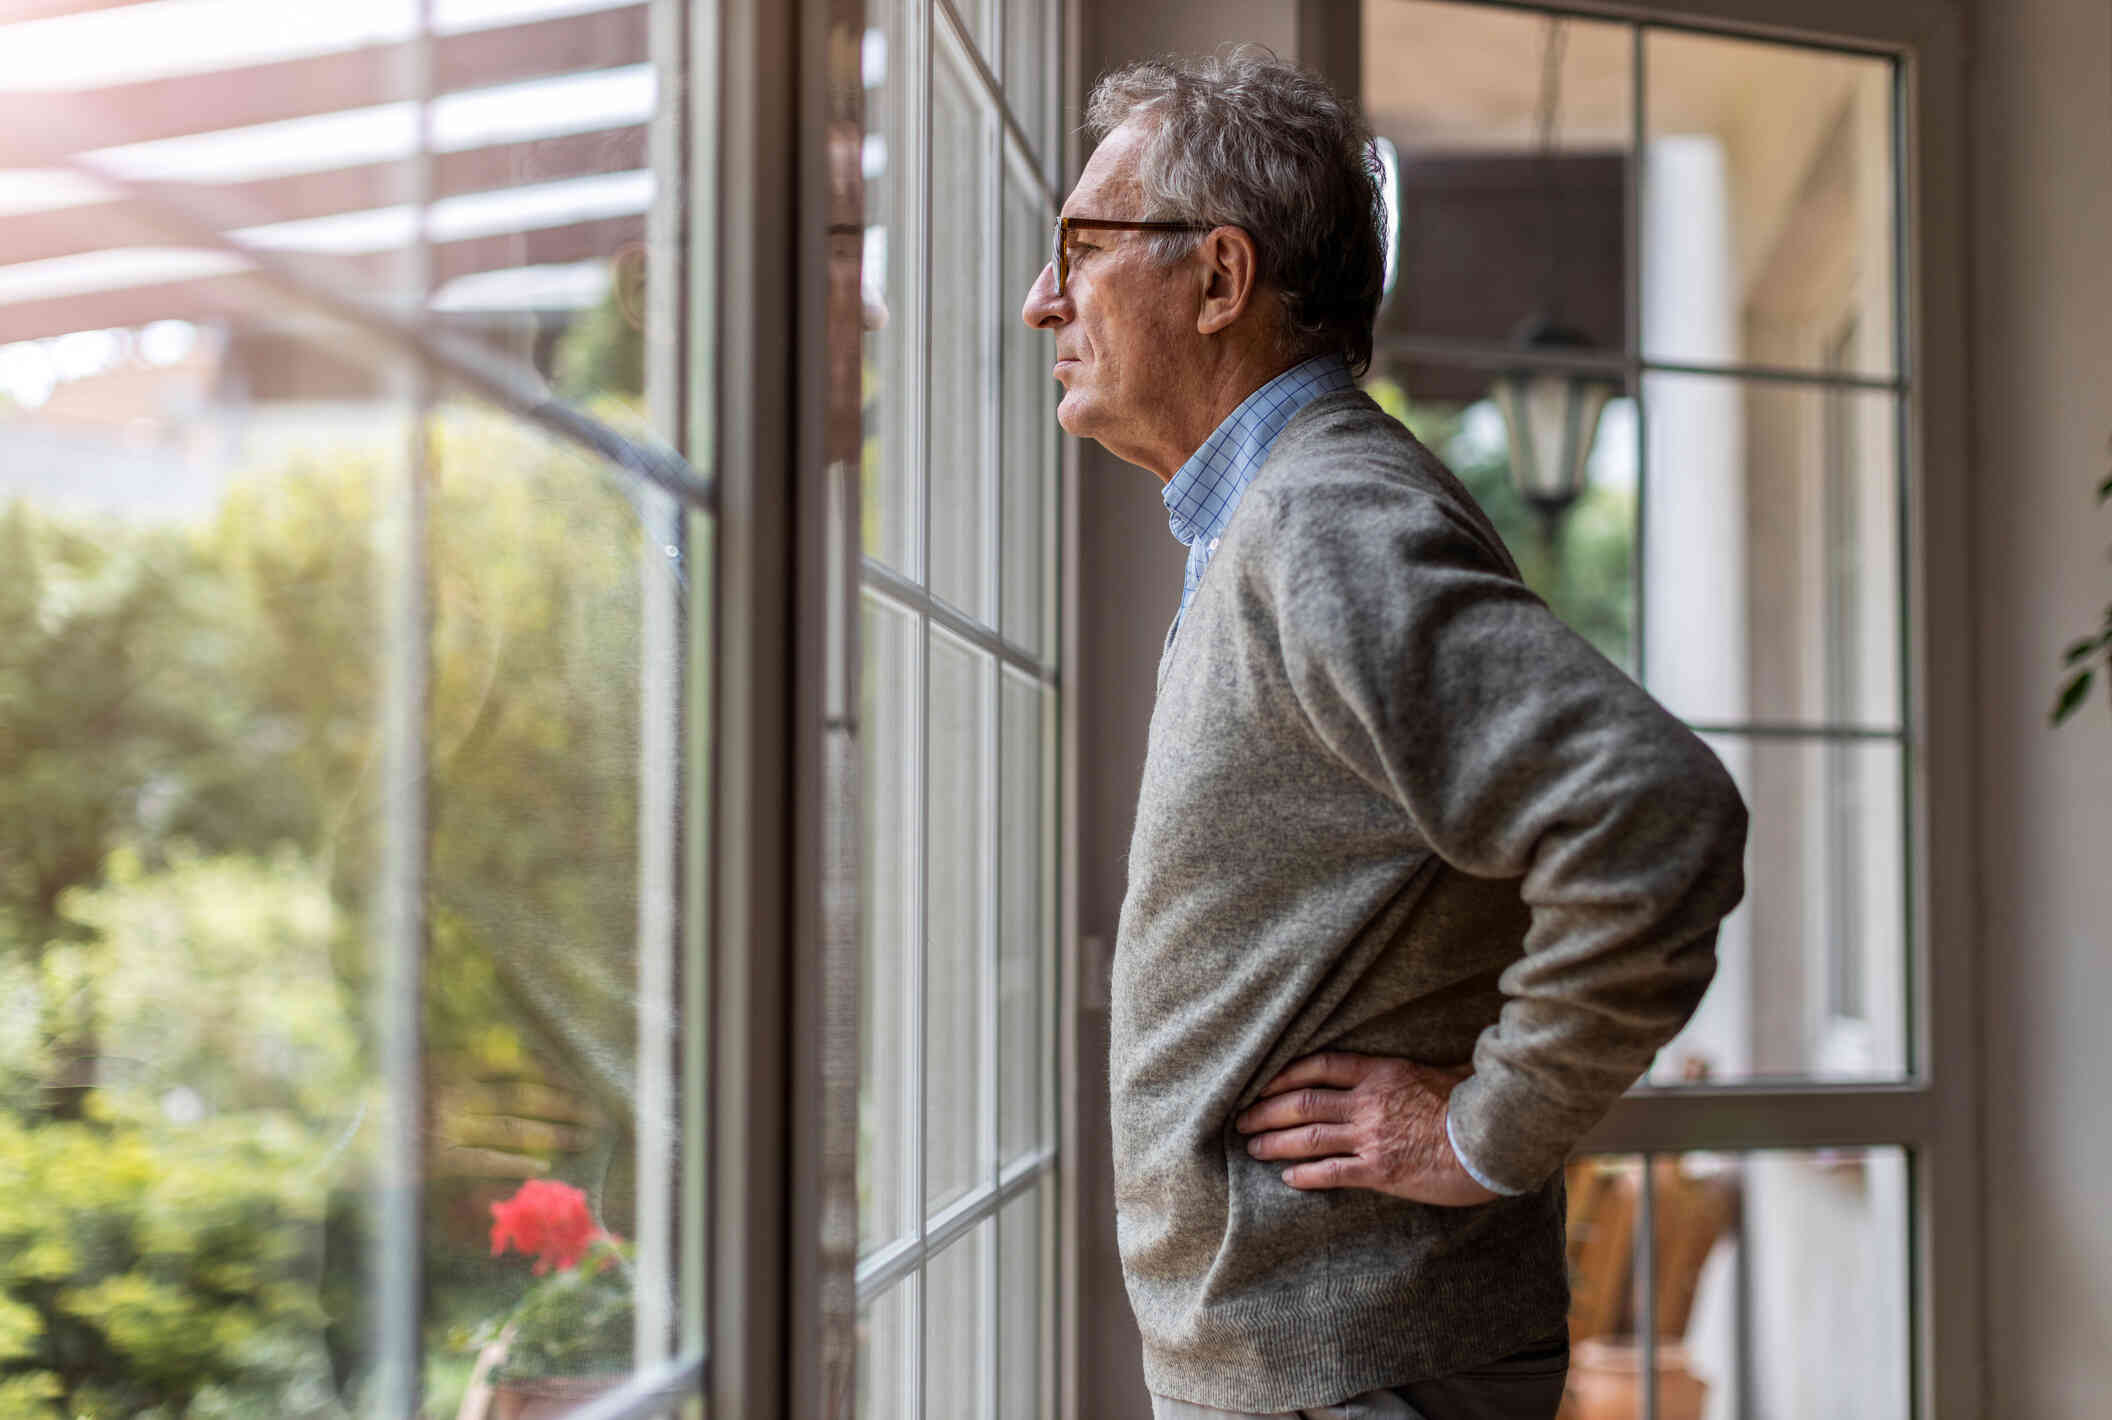 A middle aged man with glasses rests his hands on his hip while standing infront of a window and gazing out while dedep in thought.